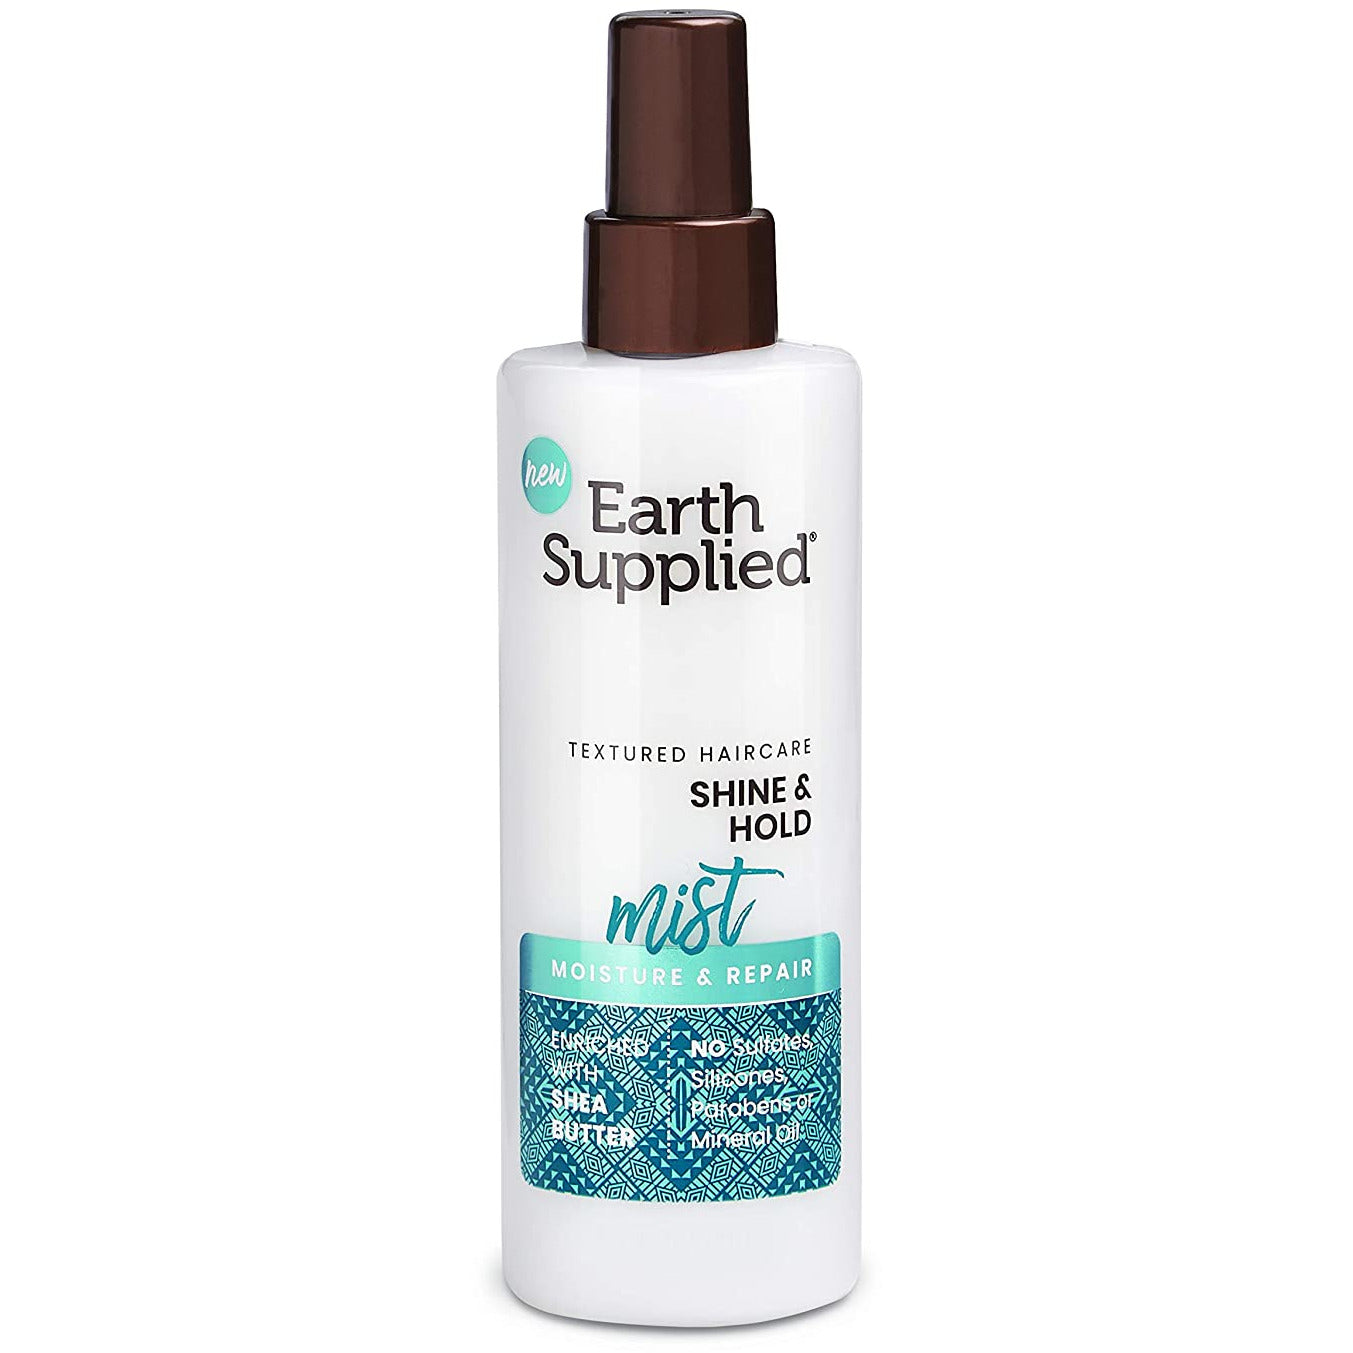 Earth Supplied Moisture & Repair Shine and Hold Mist 8.5 oz